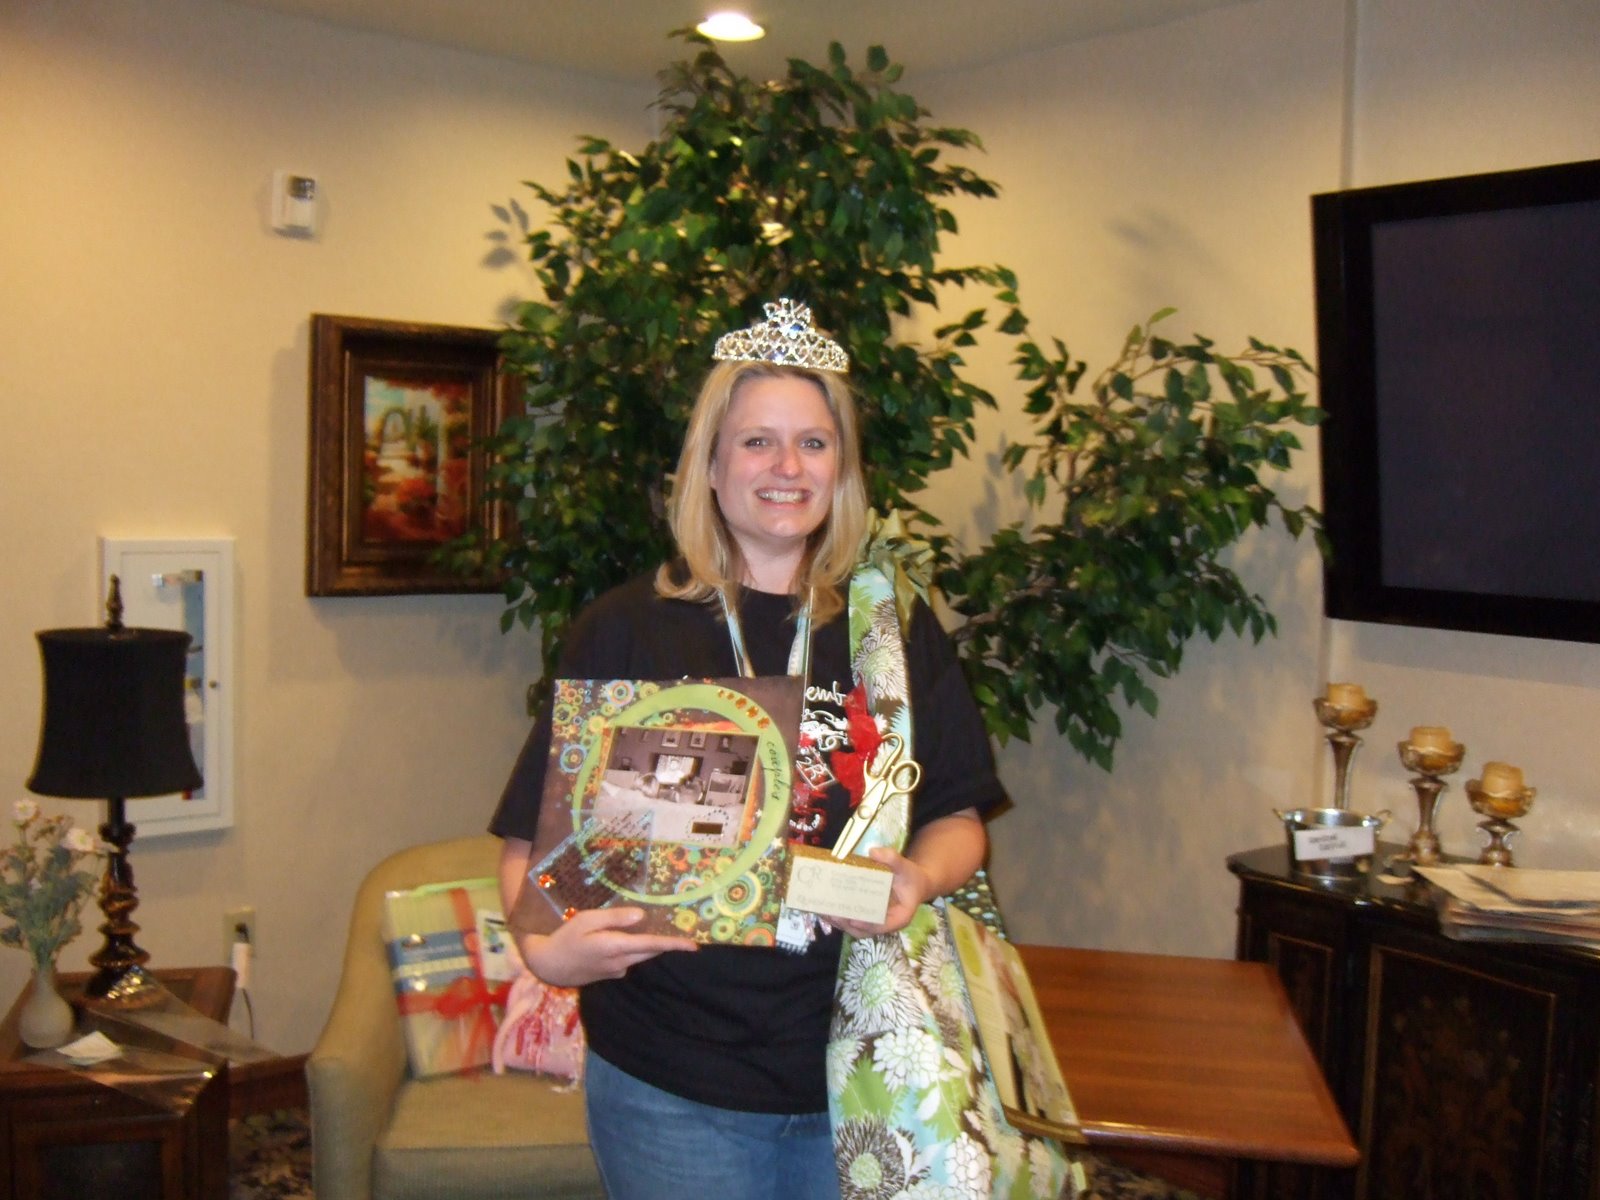 Our April 2008 C2R Queen of the Crop!